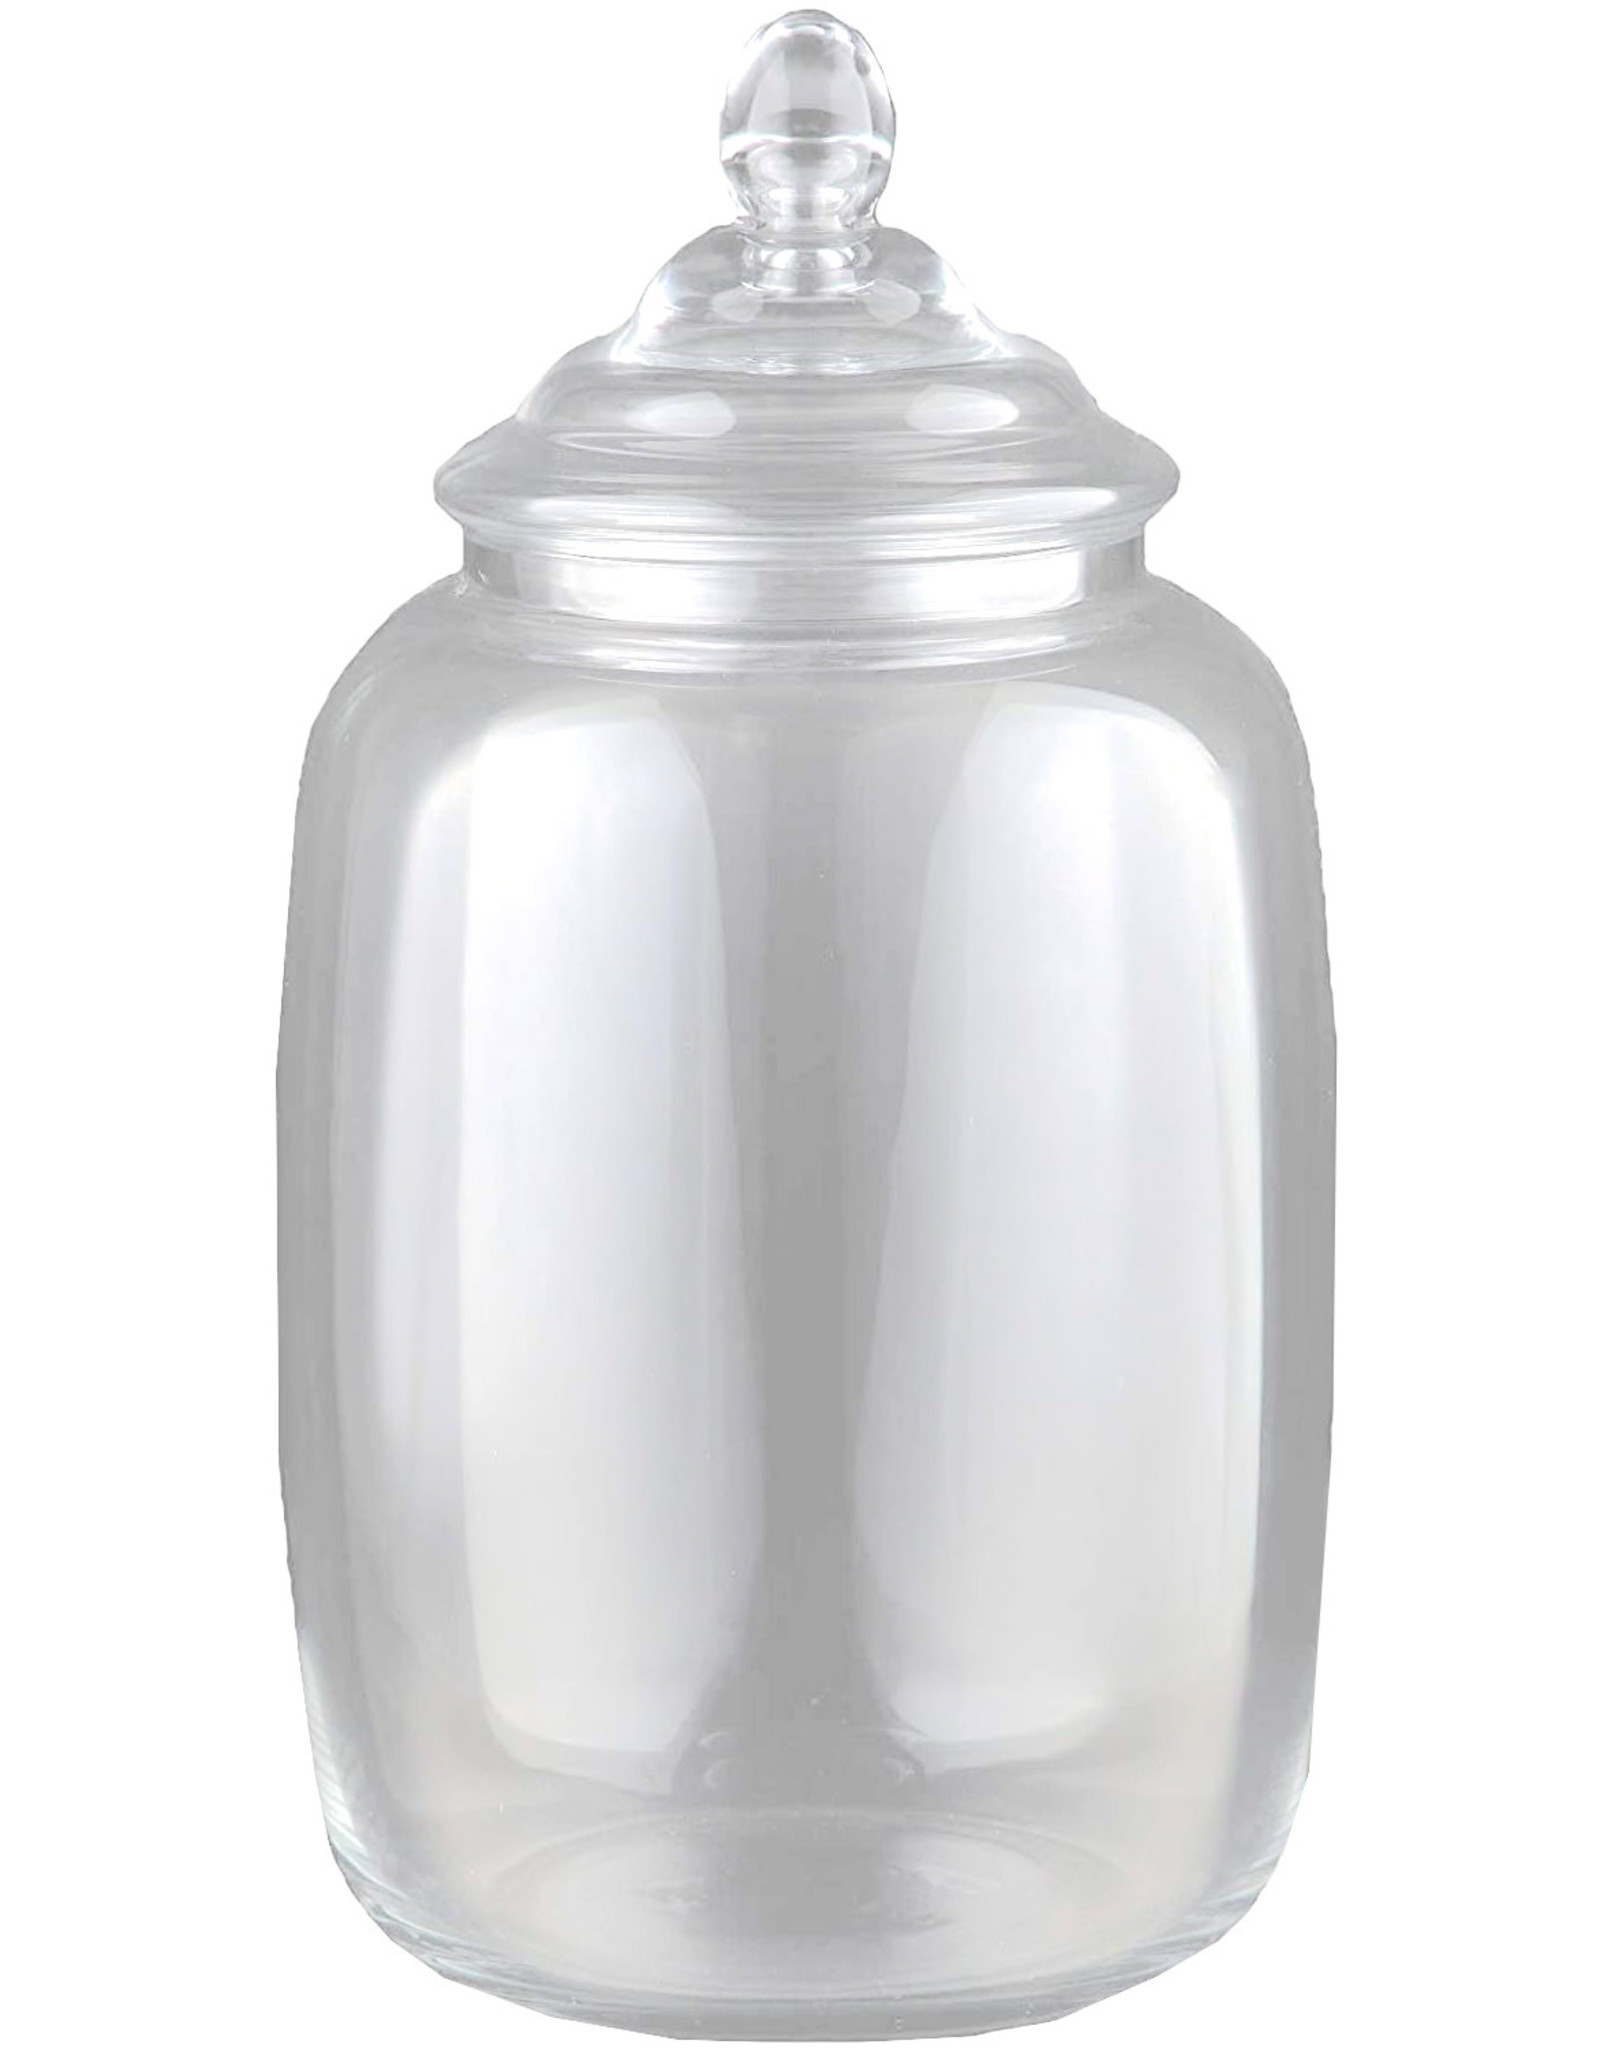 Digs Apothecary Glass Jar W Lid 10Dx17.5H Inch Clear